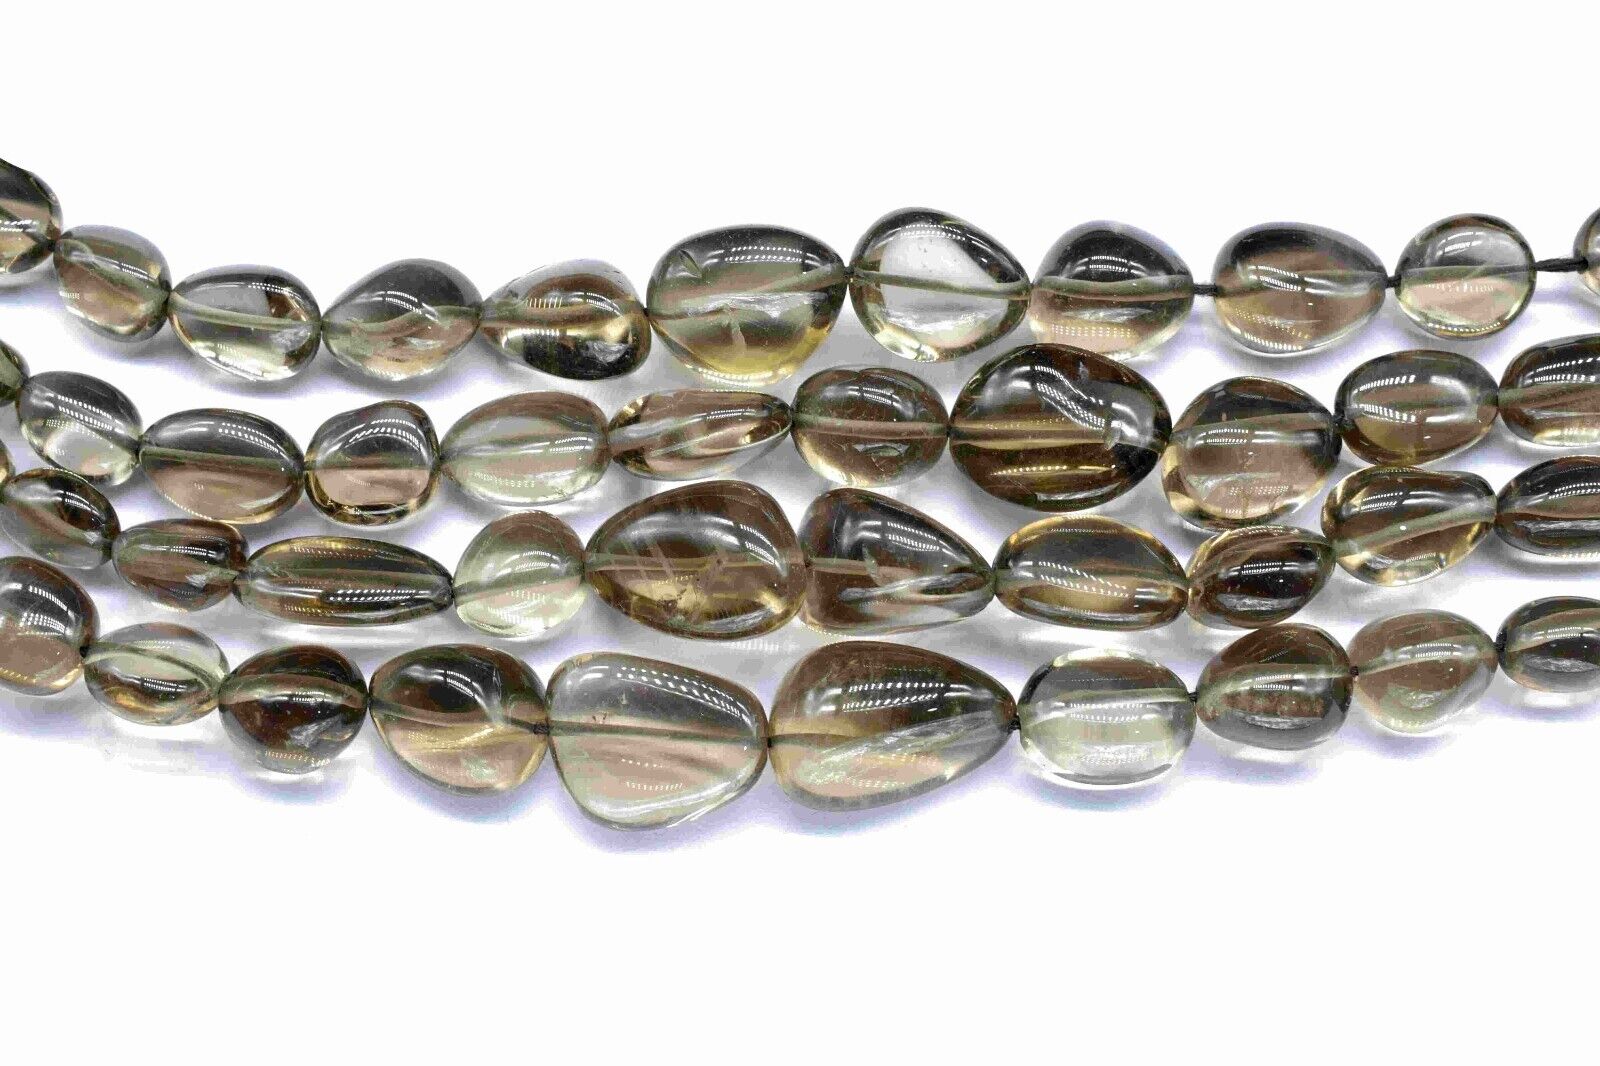 Natural Smoky Quartz Smooth Oval Briolettes - Big, Smooth, and Stunning Beads